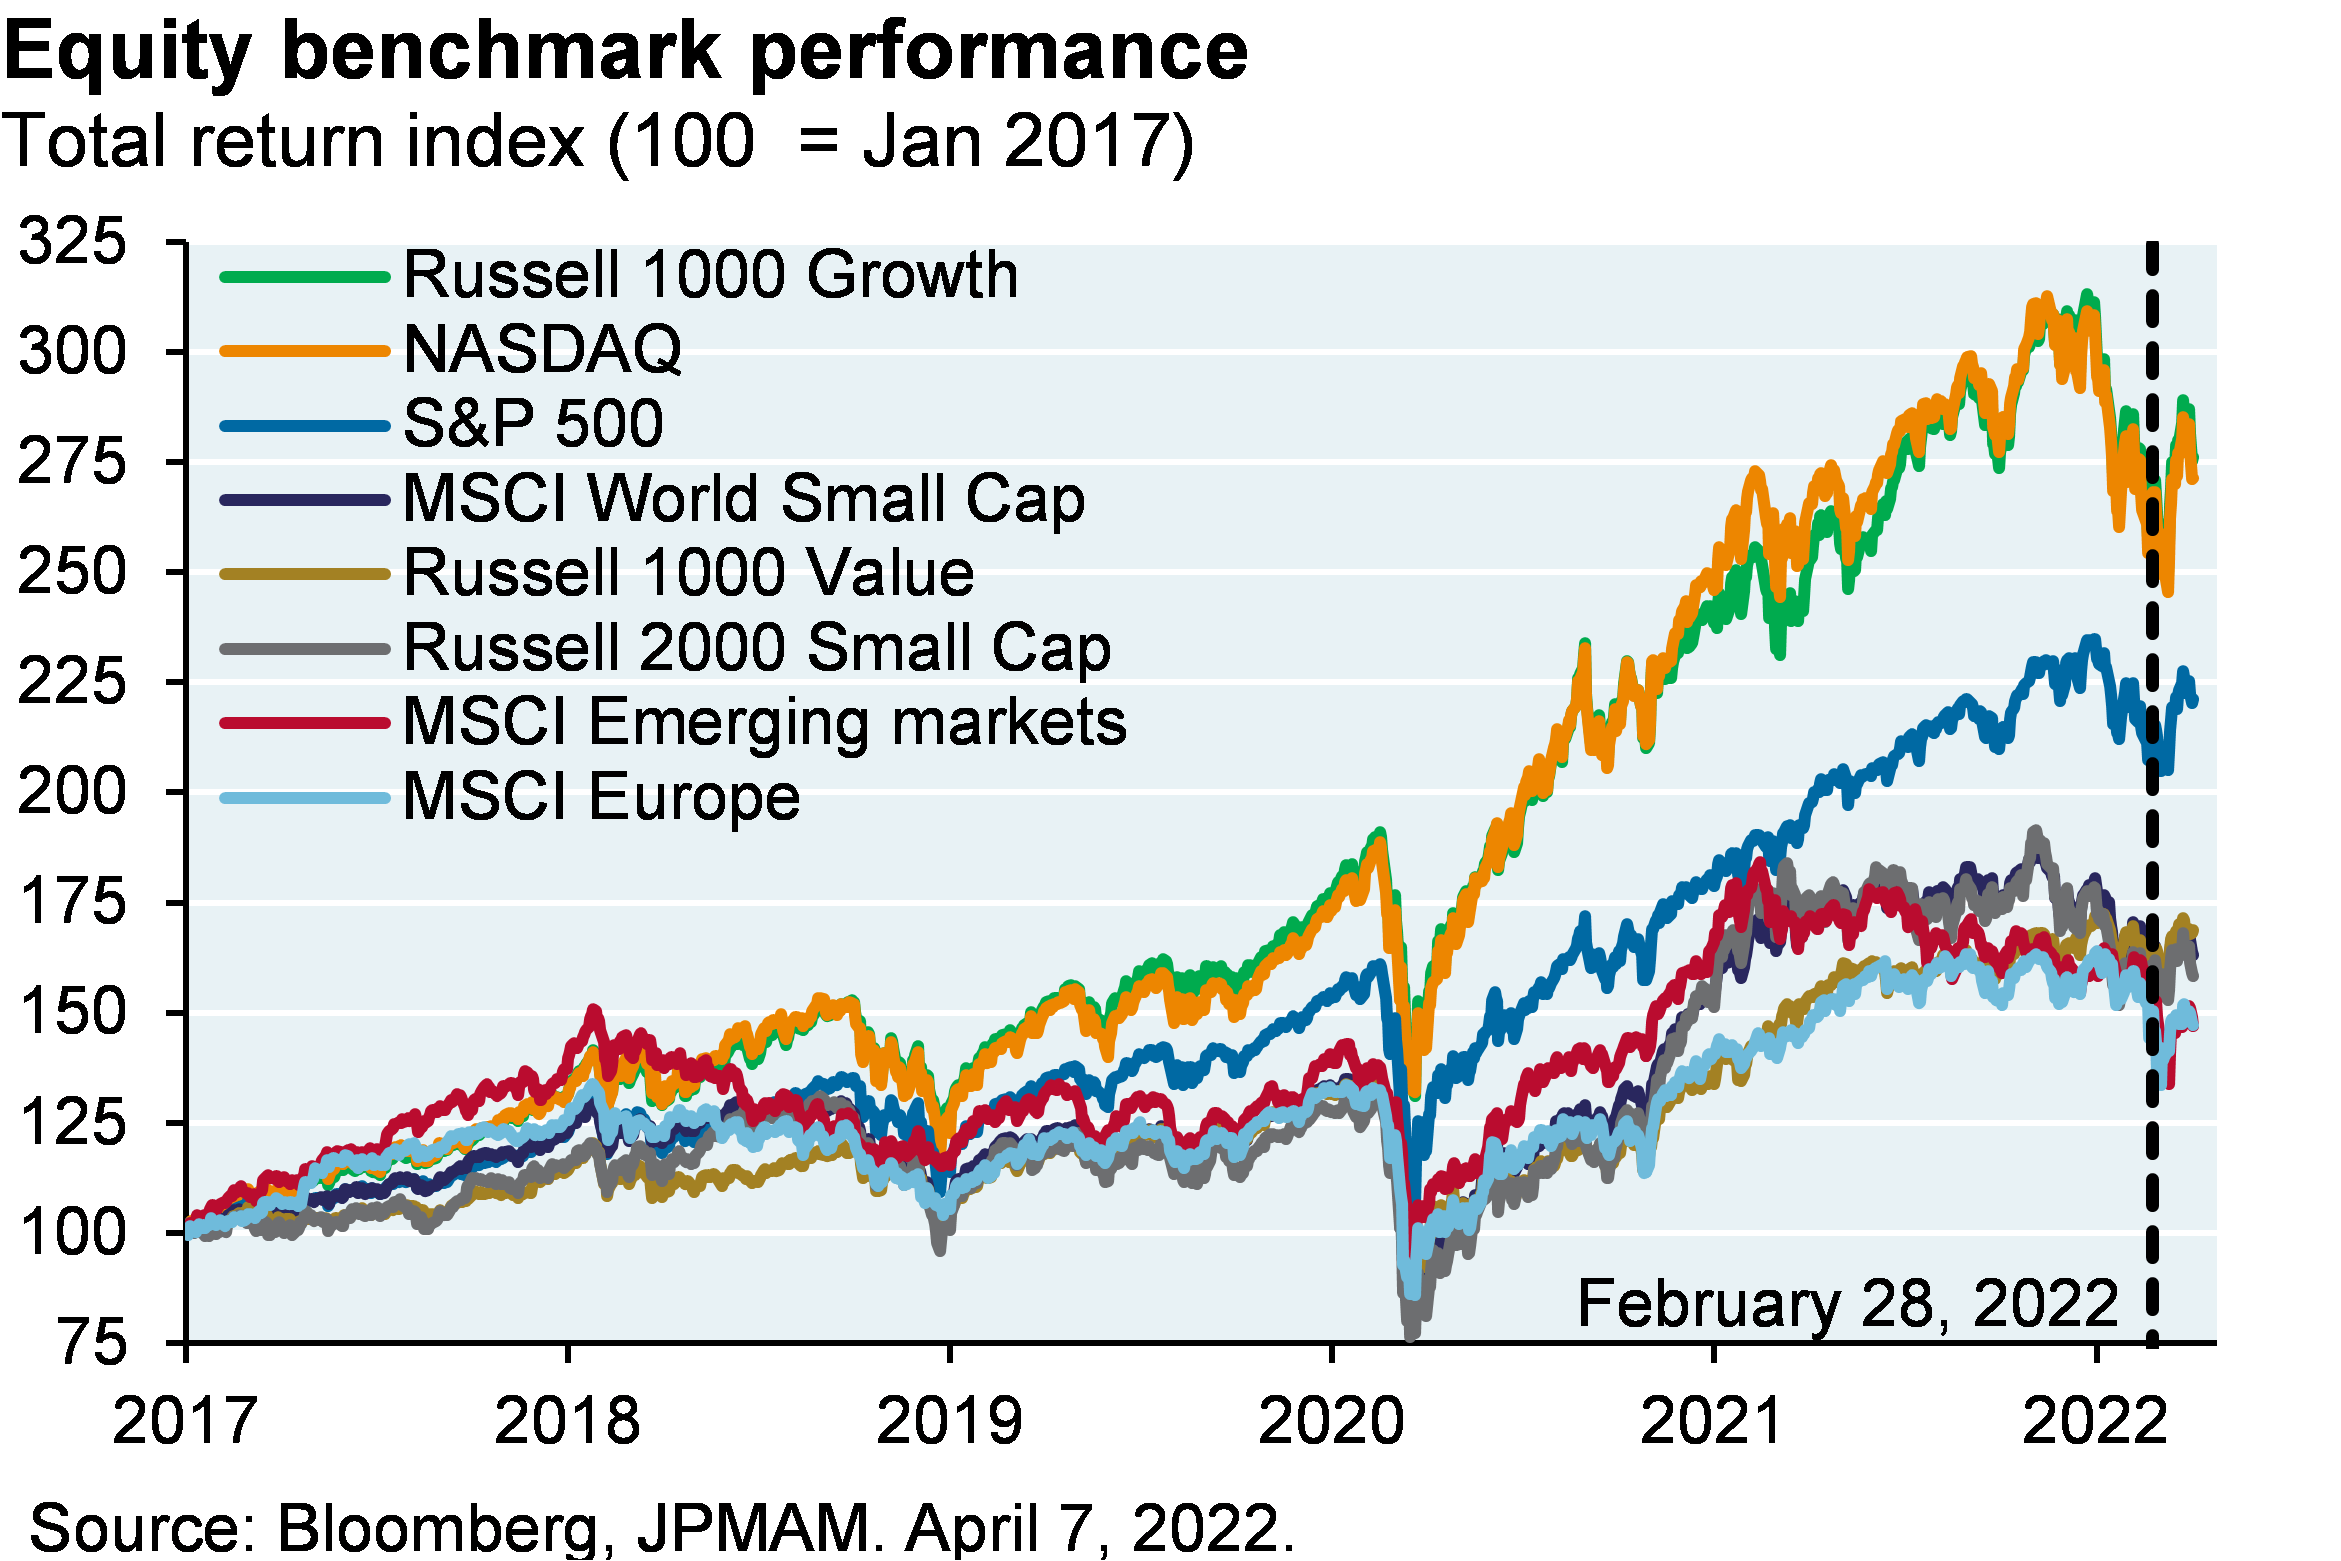 Line chart compares equity benchmark performance from 2017 to now. The Russell 1000 Growth Index and NASDAQ Index have significantly outperformed alternative benchmarks such as value, small cap, emerging markets and European indices.